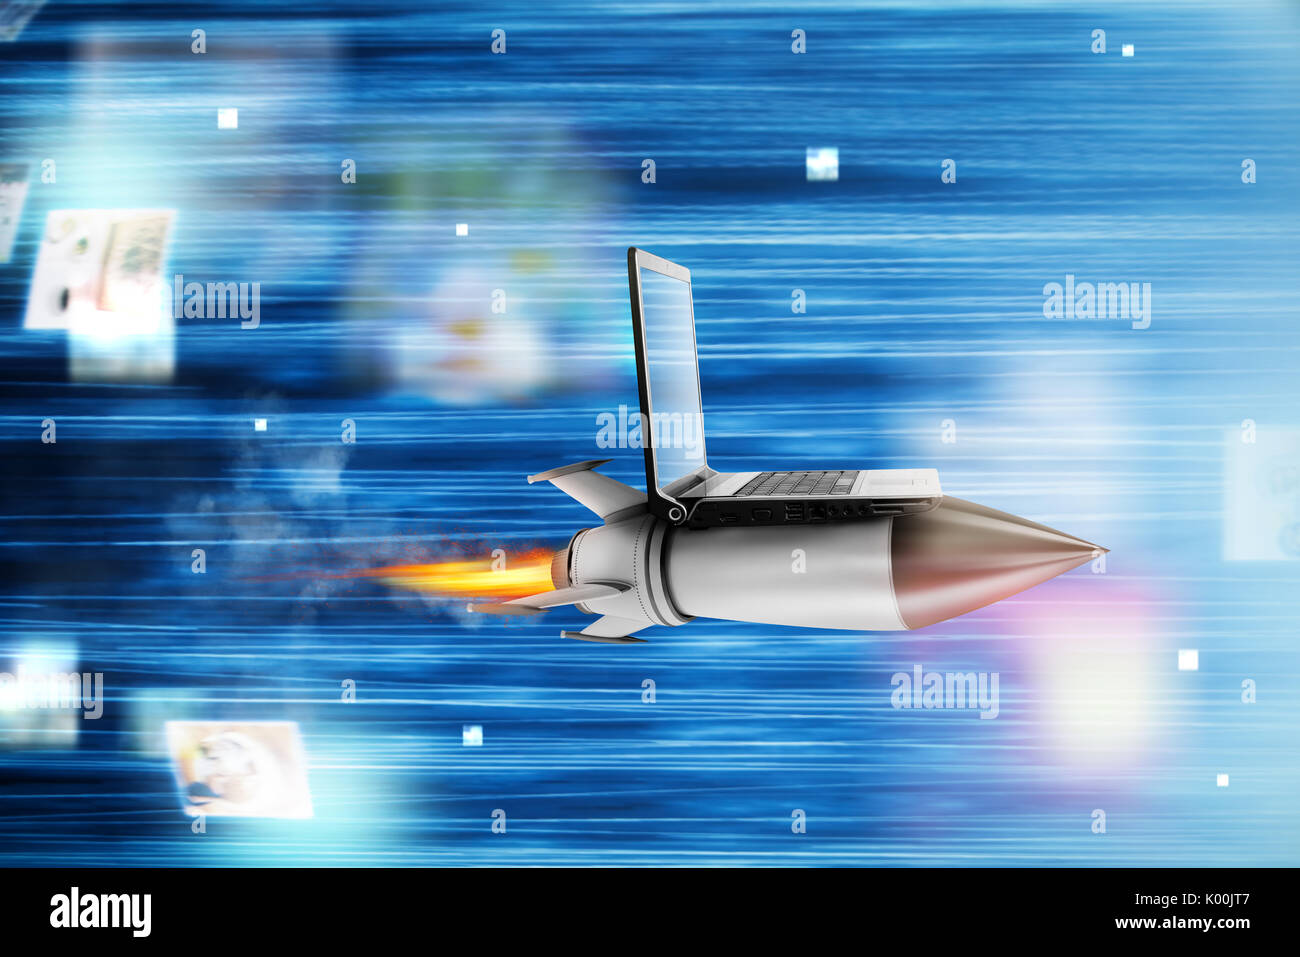 Fast internet concept with a laptop over a rocket Stock Photo